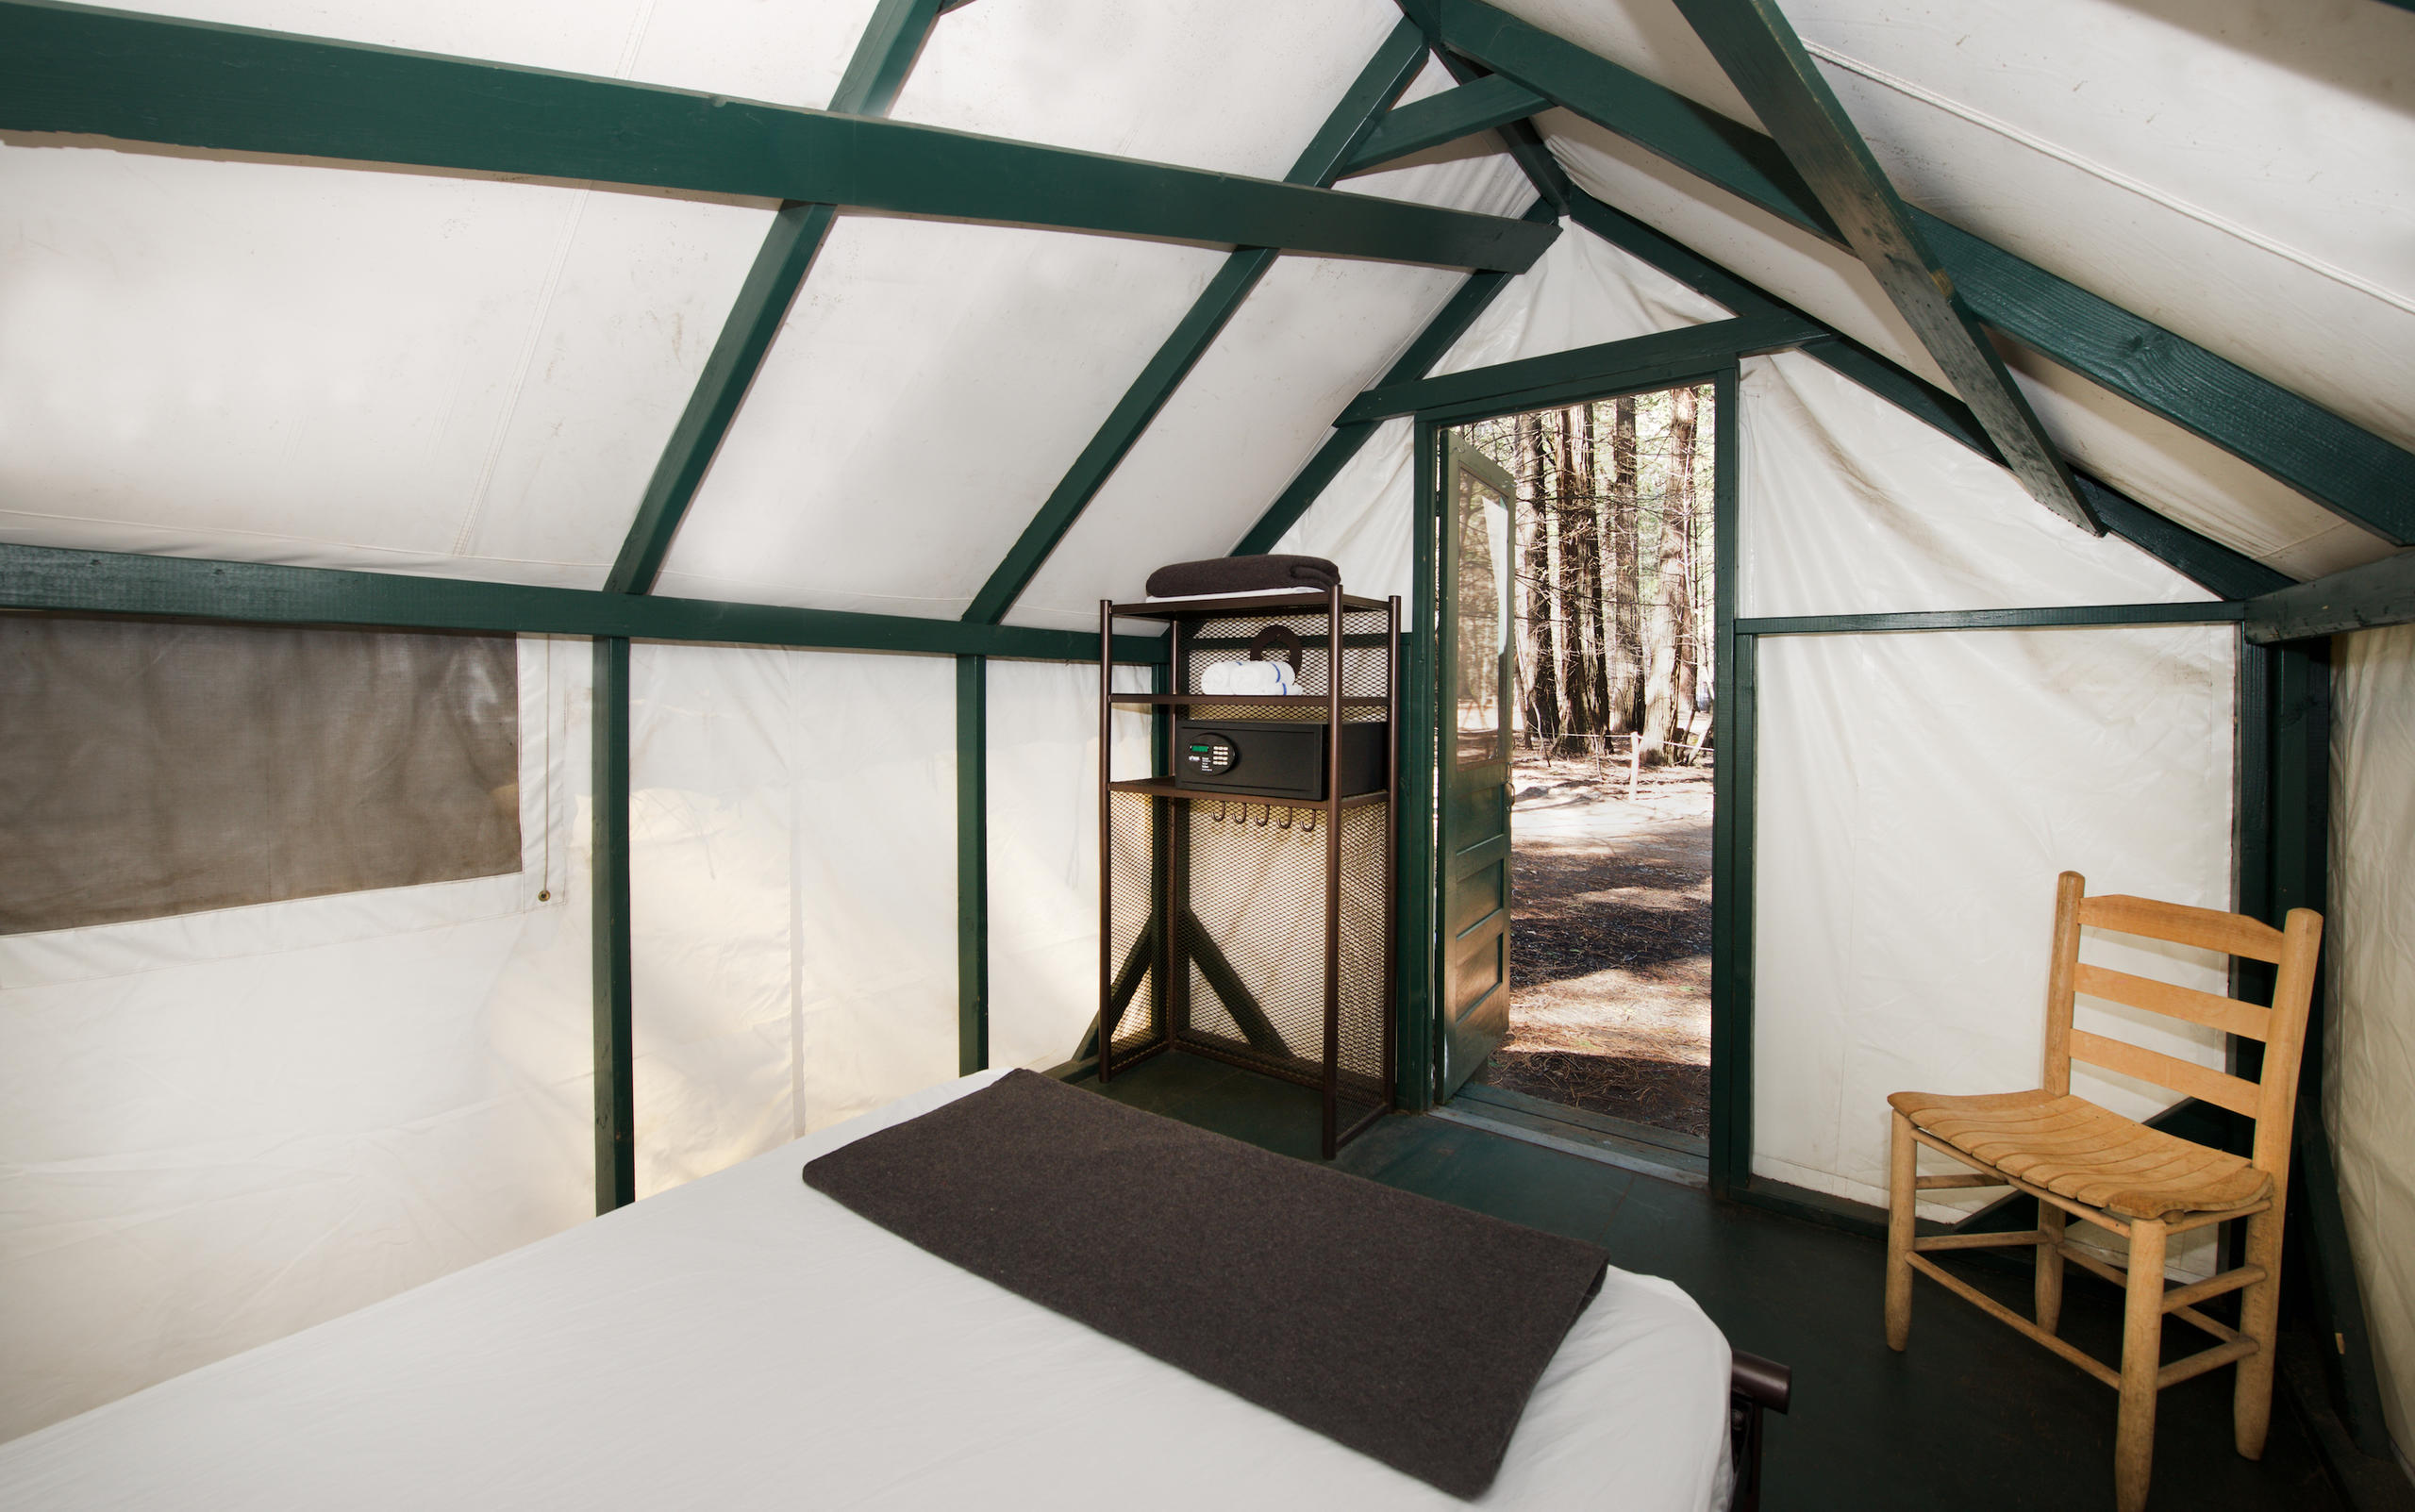 2-Day Yosemite Independent Summer Tour from San Francisco | Stay at Curry Village Tent Cabin